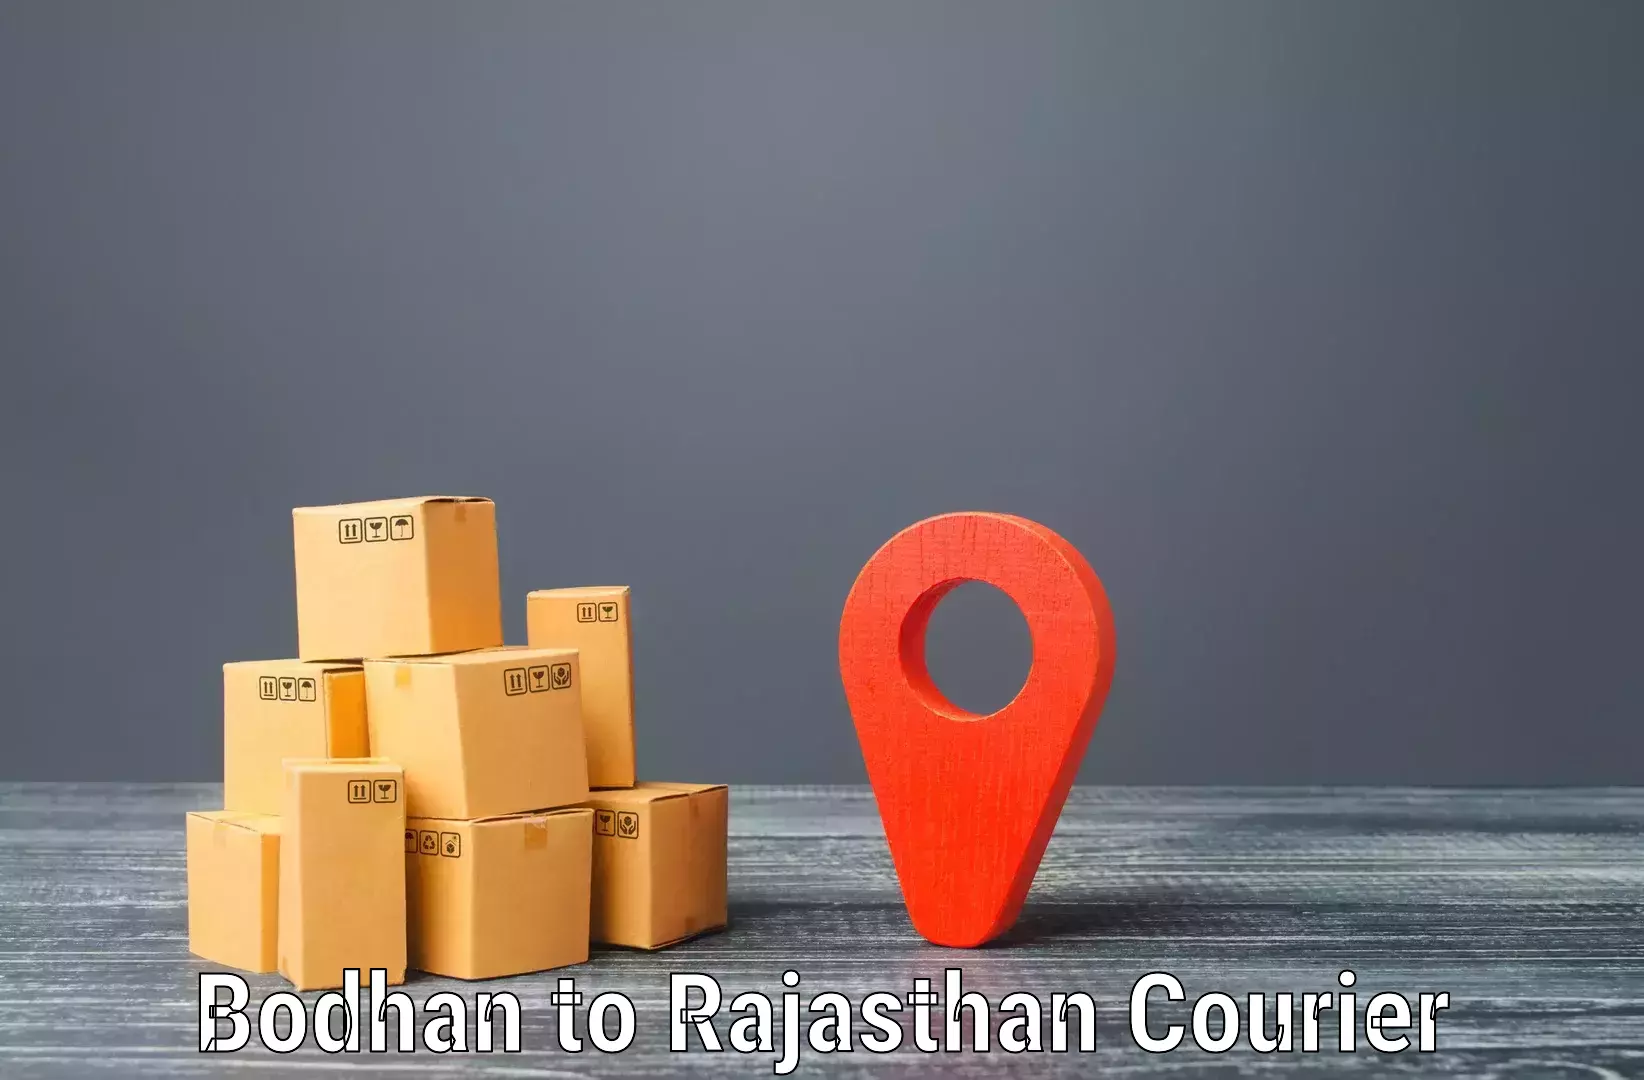 Courier service innovation in Bodhan to Bharatpur